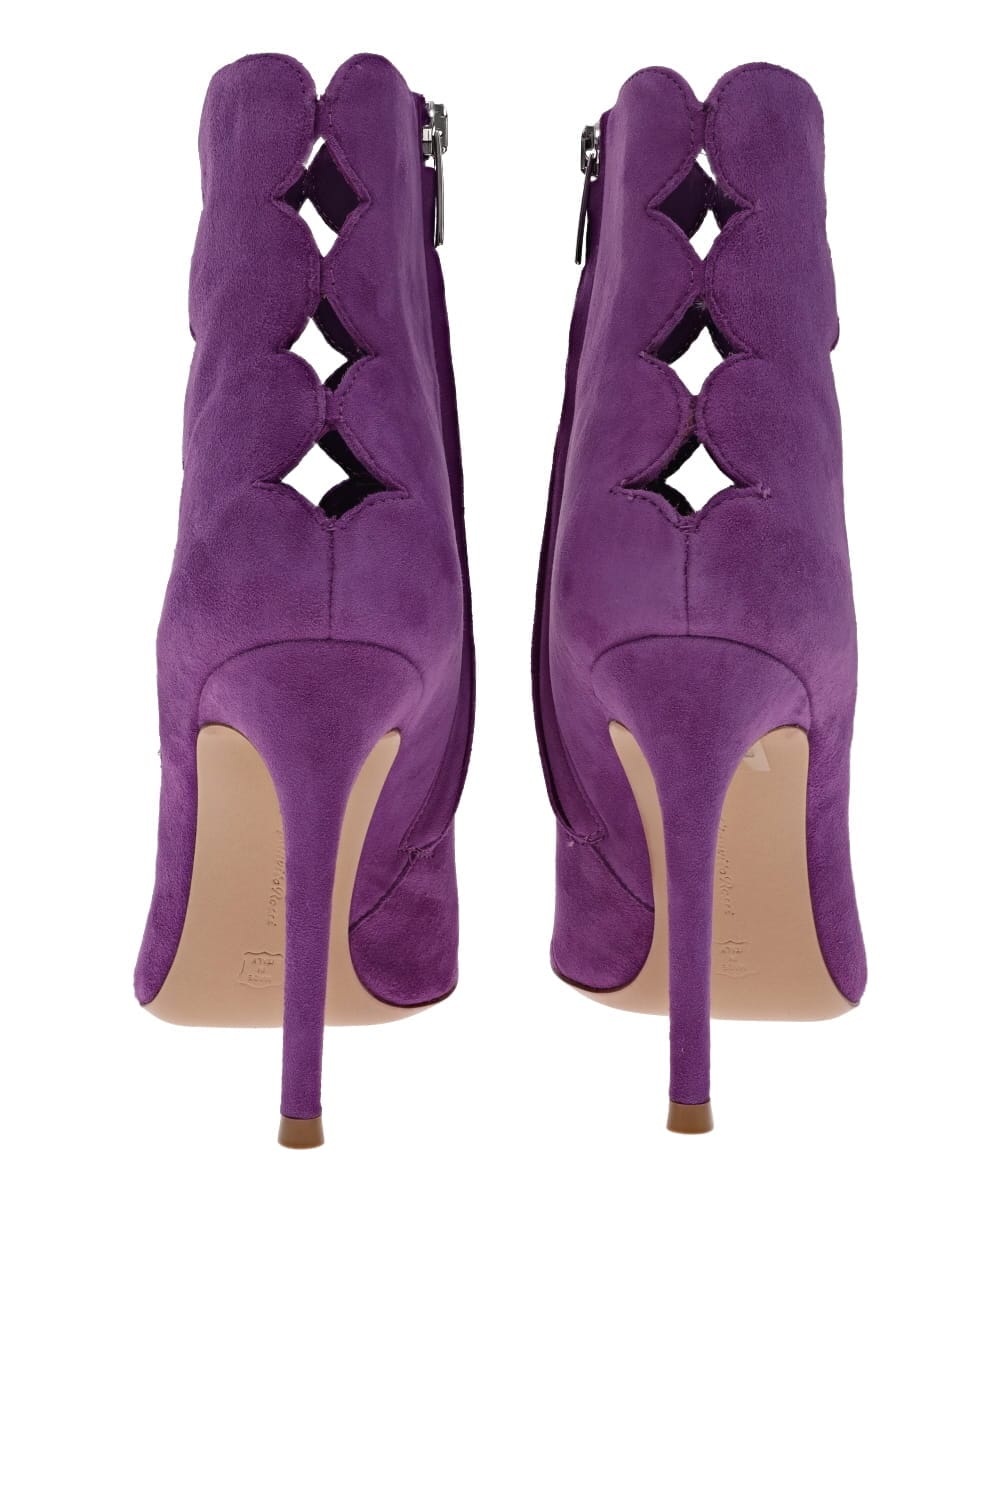 Gianvito Rossi Ariana Purple Suede Cut Out Booties